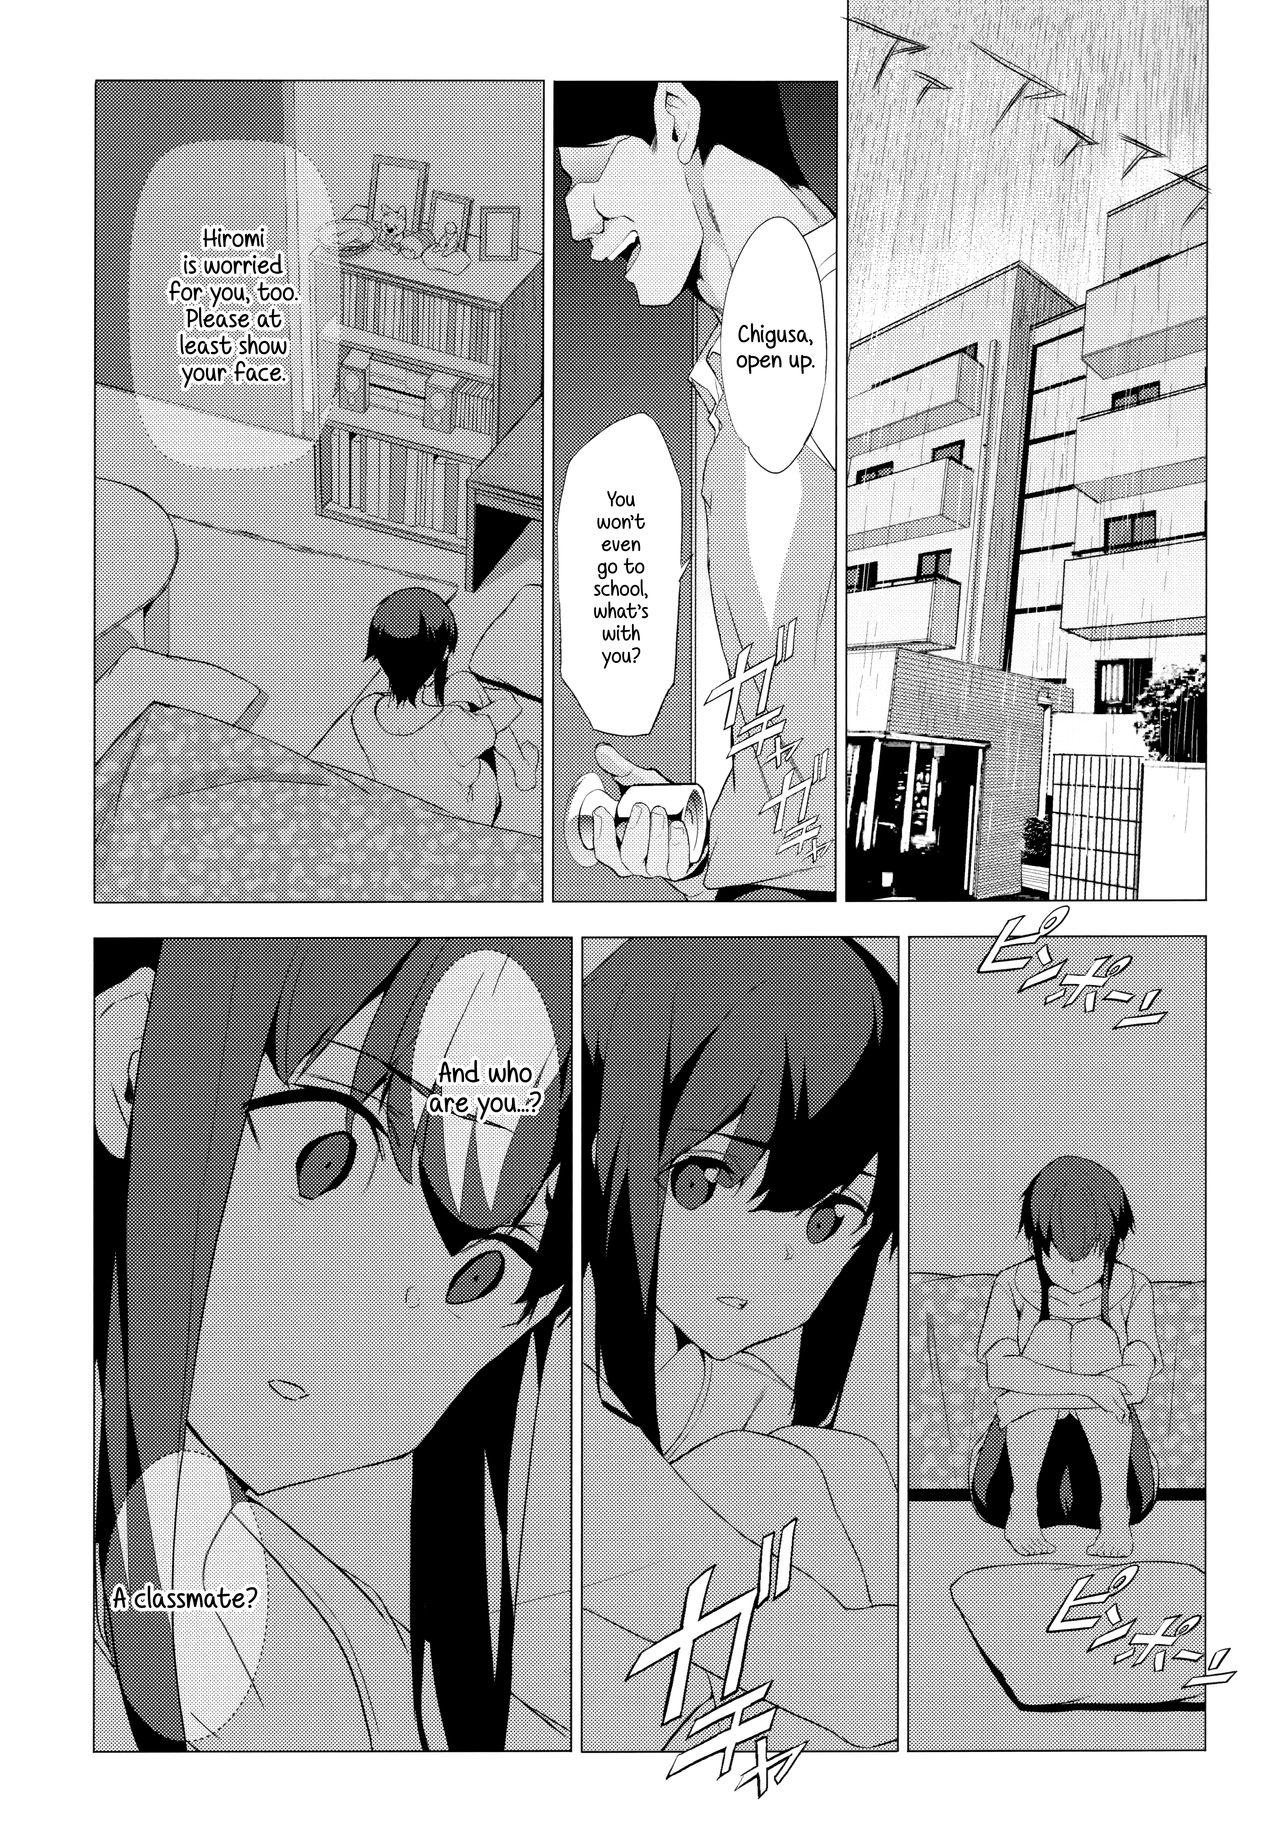 Camwhore Himitsu 06 "Ima koko de" | Secret 6 - The entanglement of a real brother and sister Blonde - Page 10